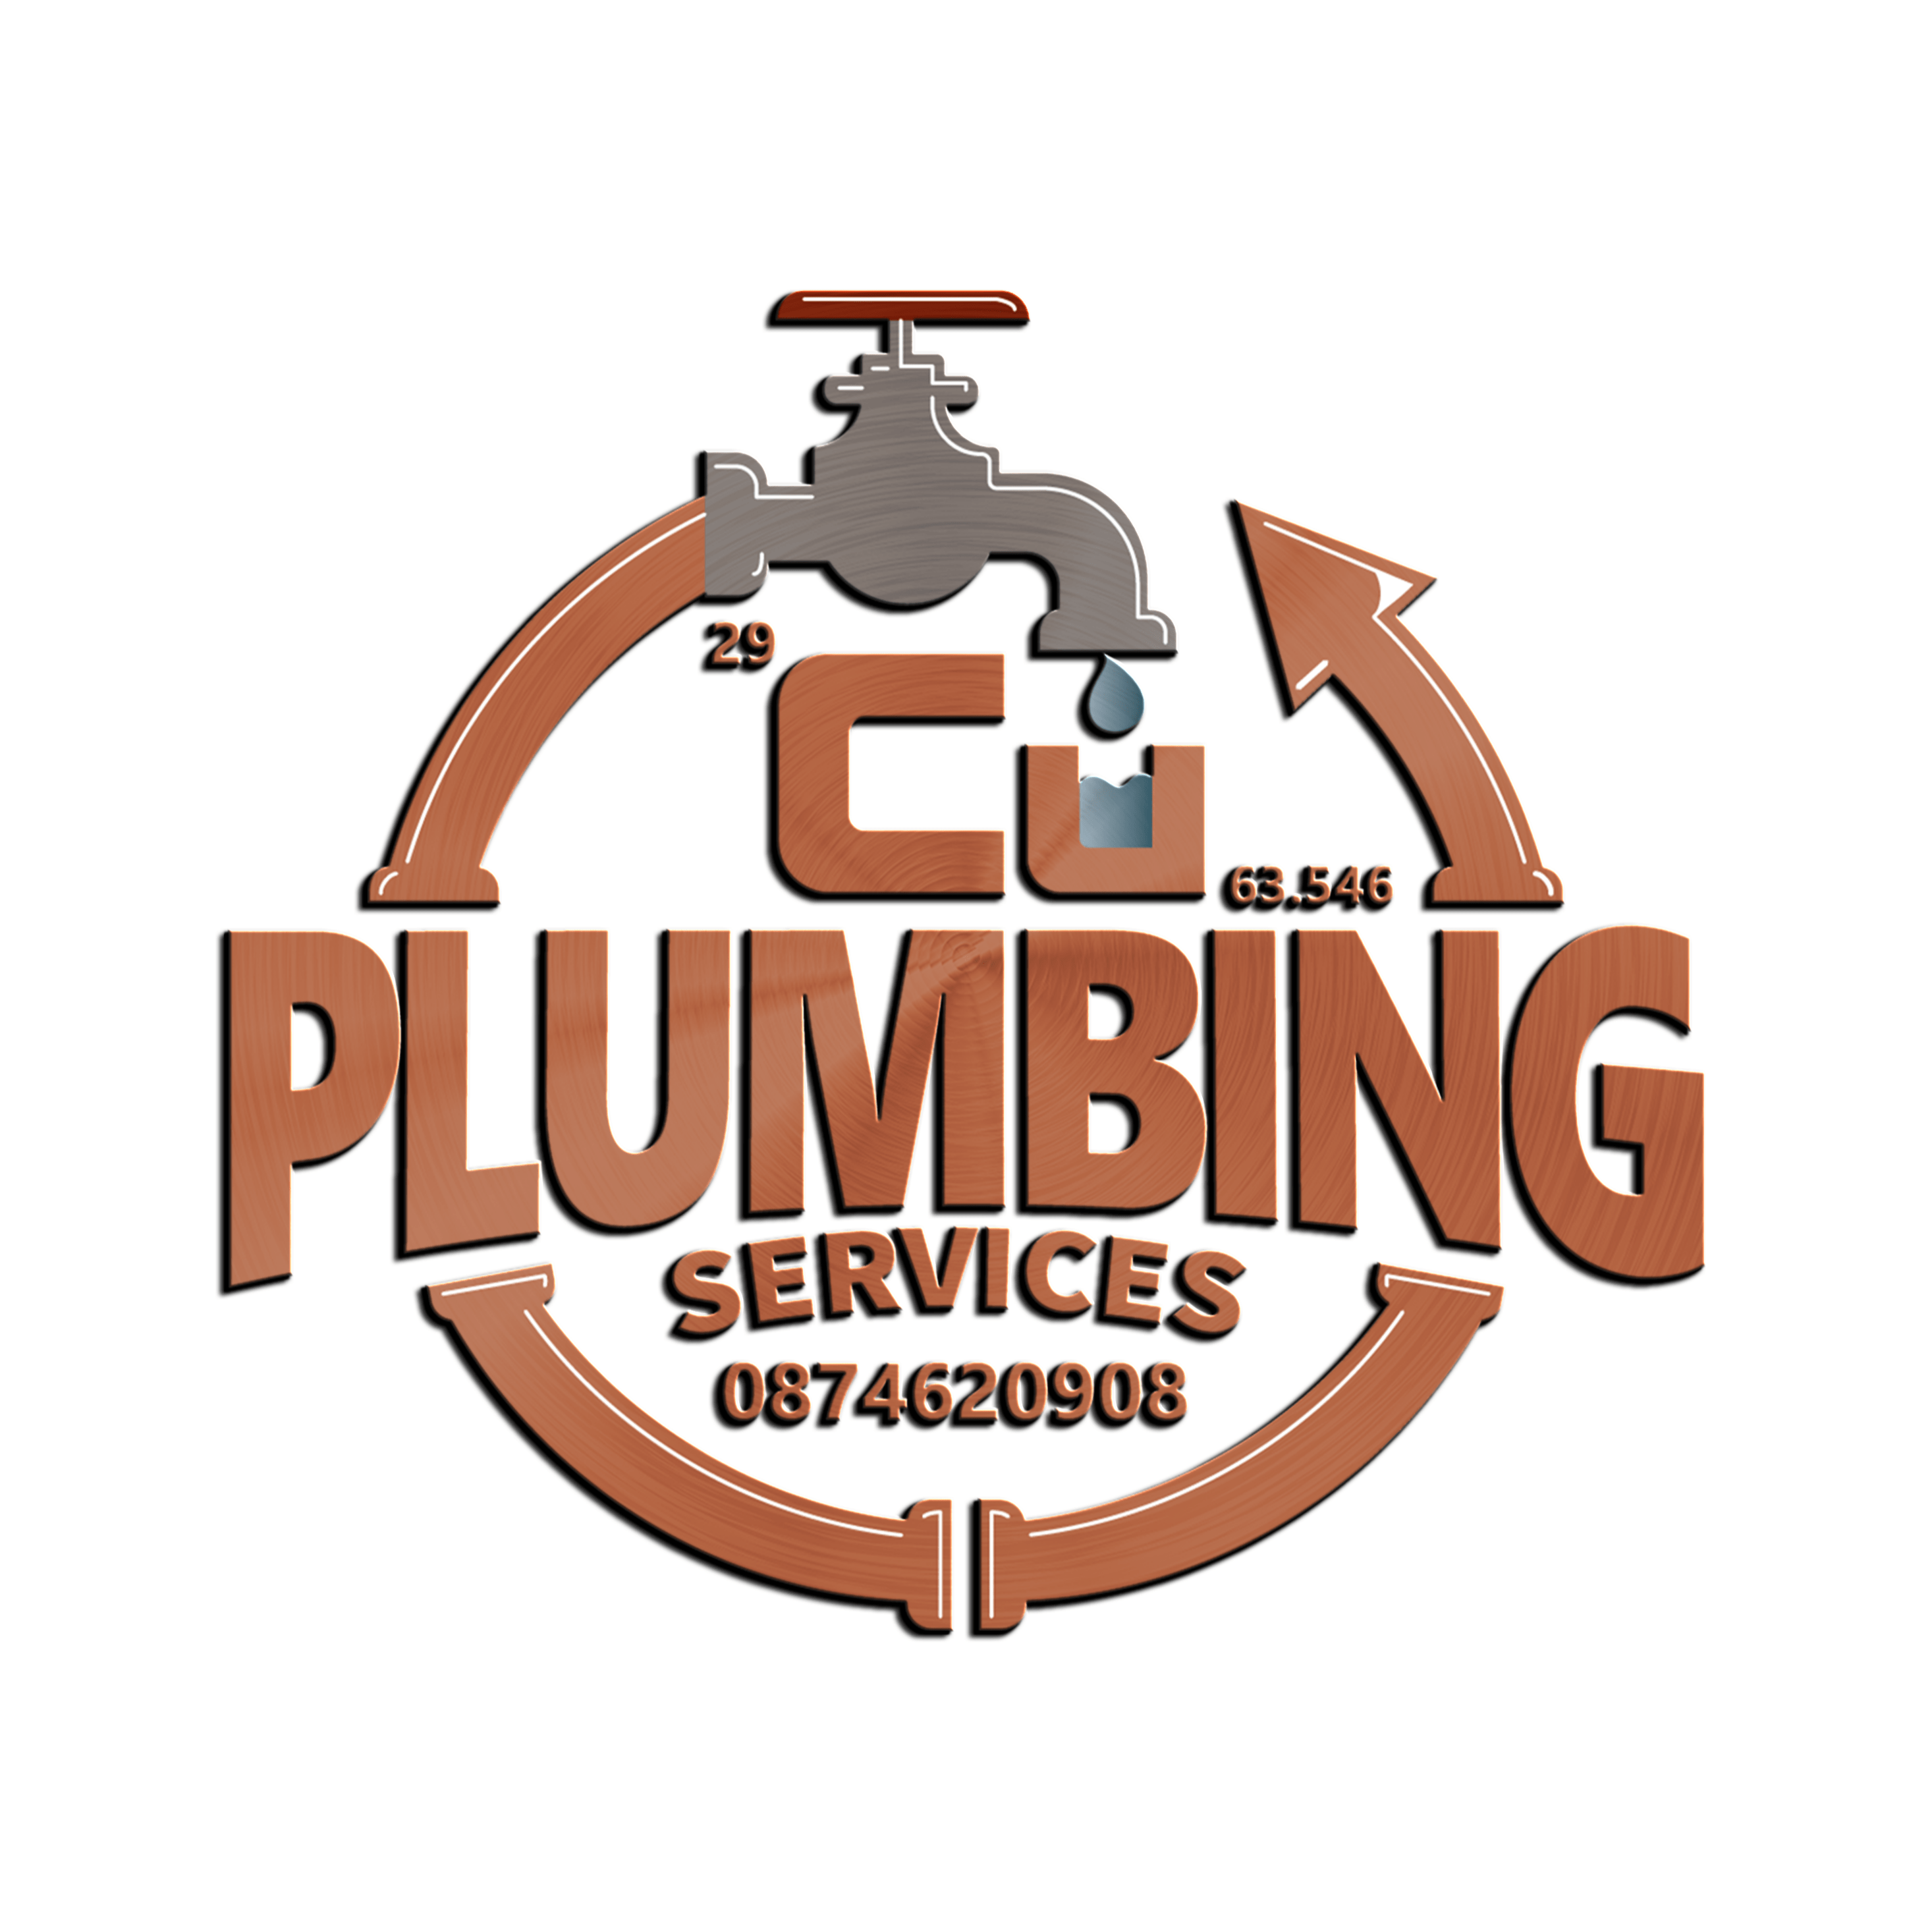 Top Plumber Services in Lucan